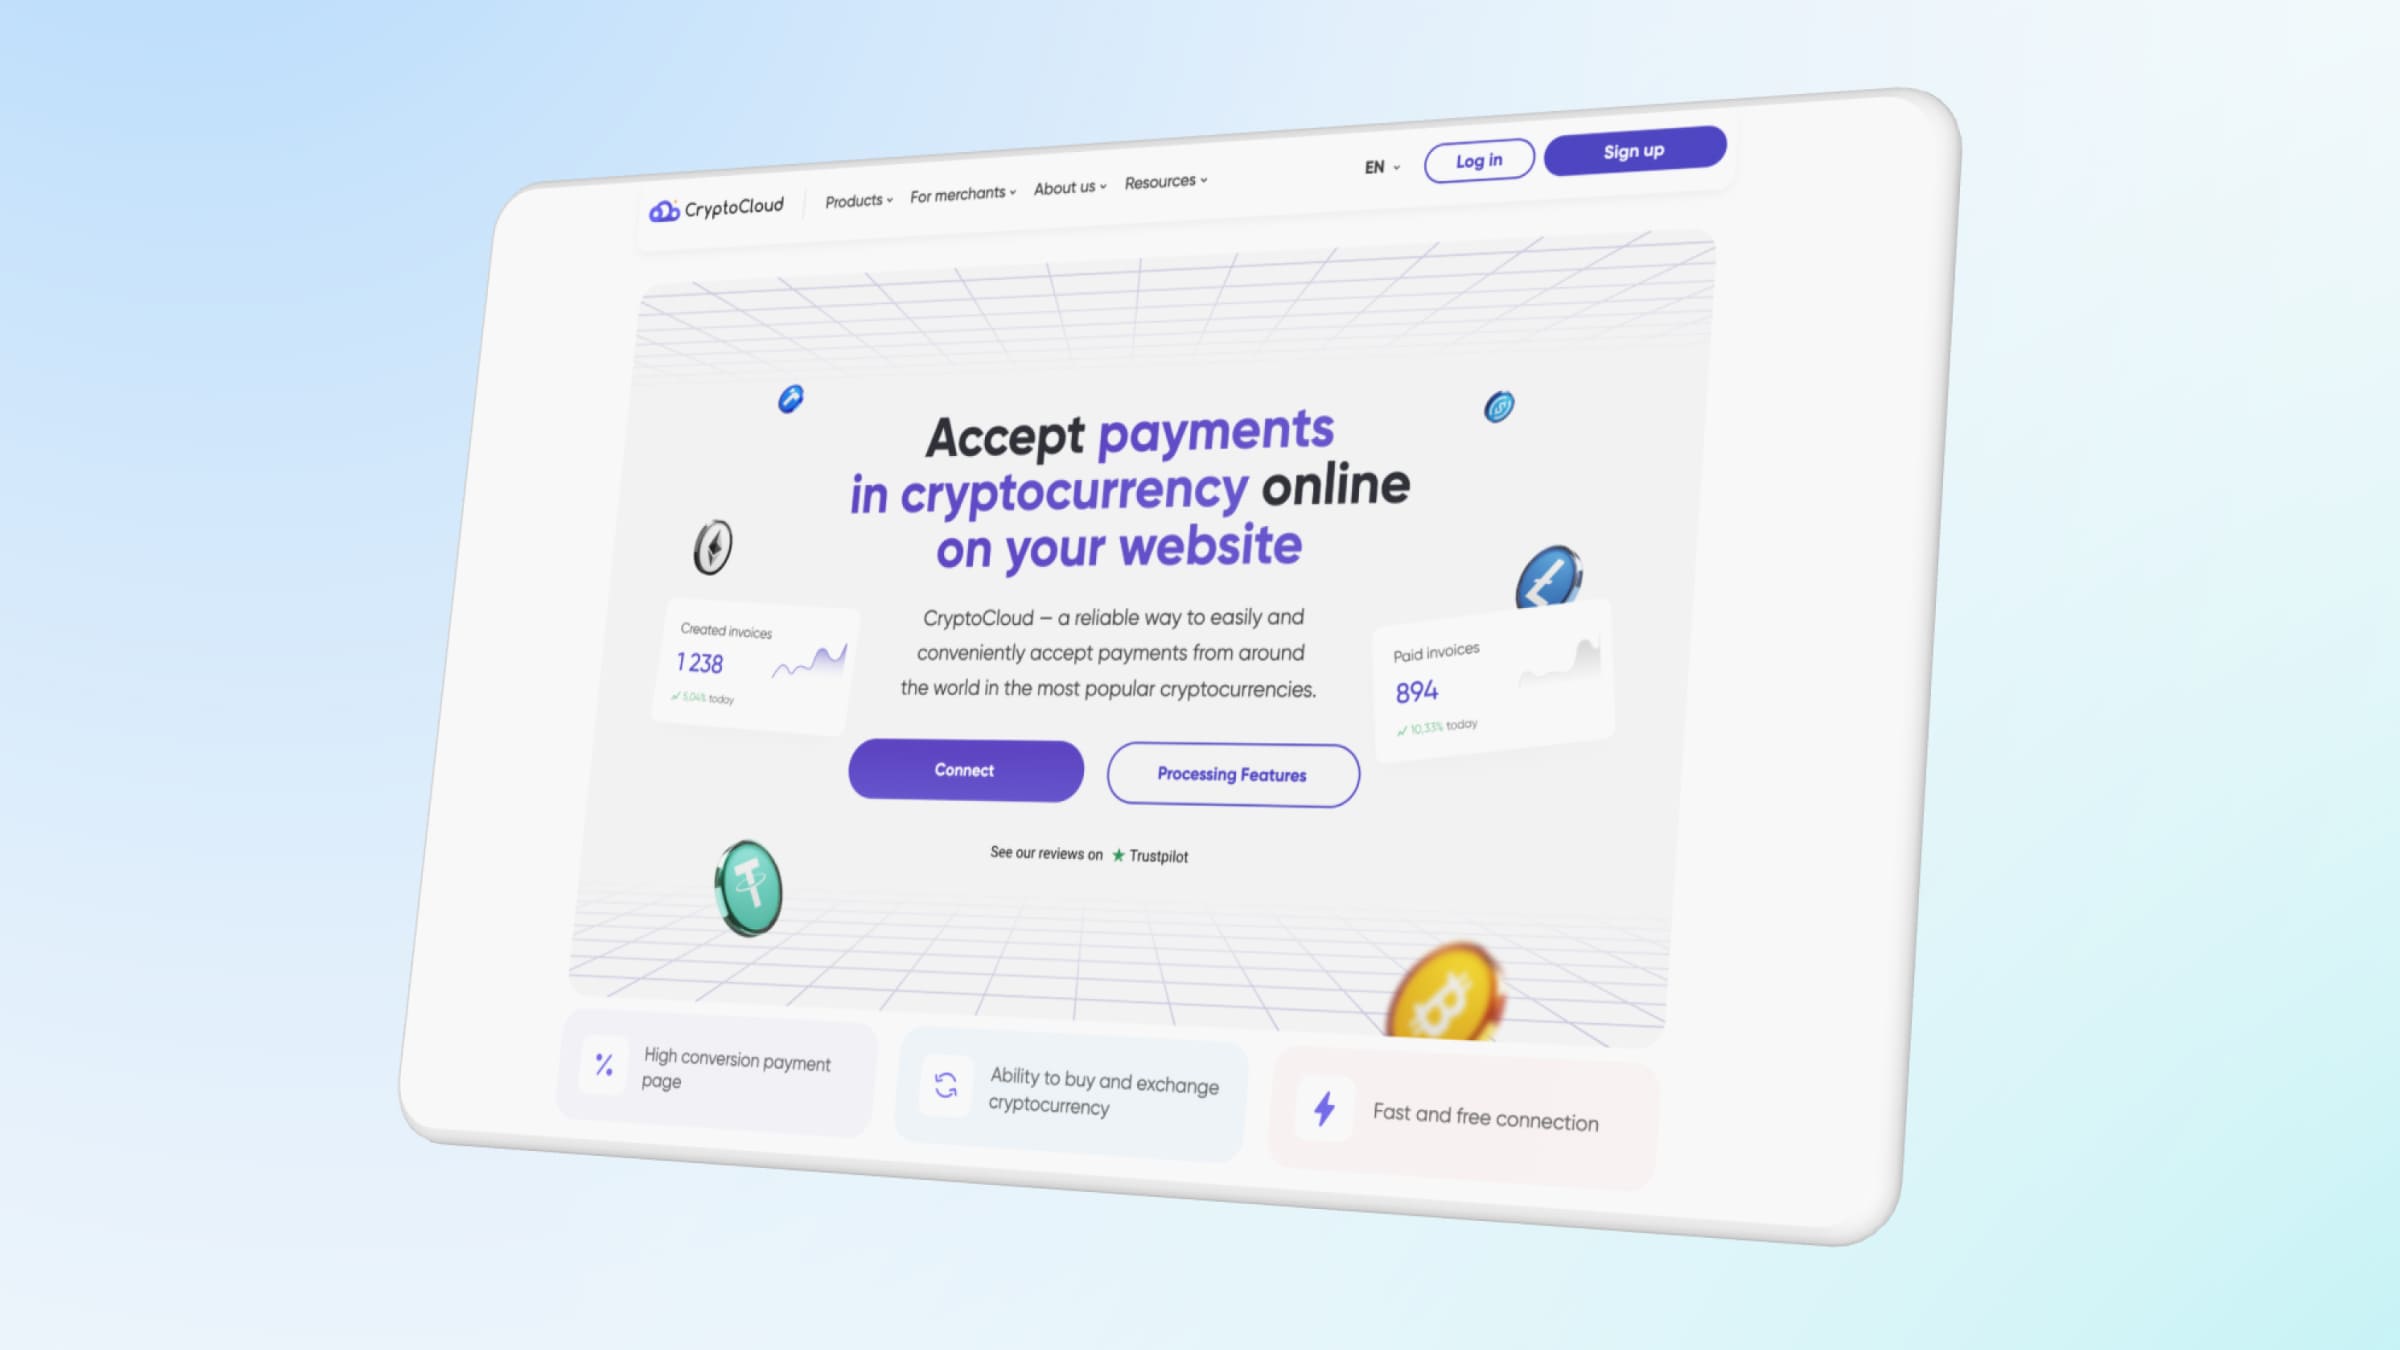 CryptoCloud automatically converts amounts to be paid and verifies transactions.